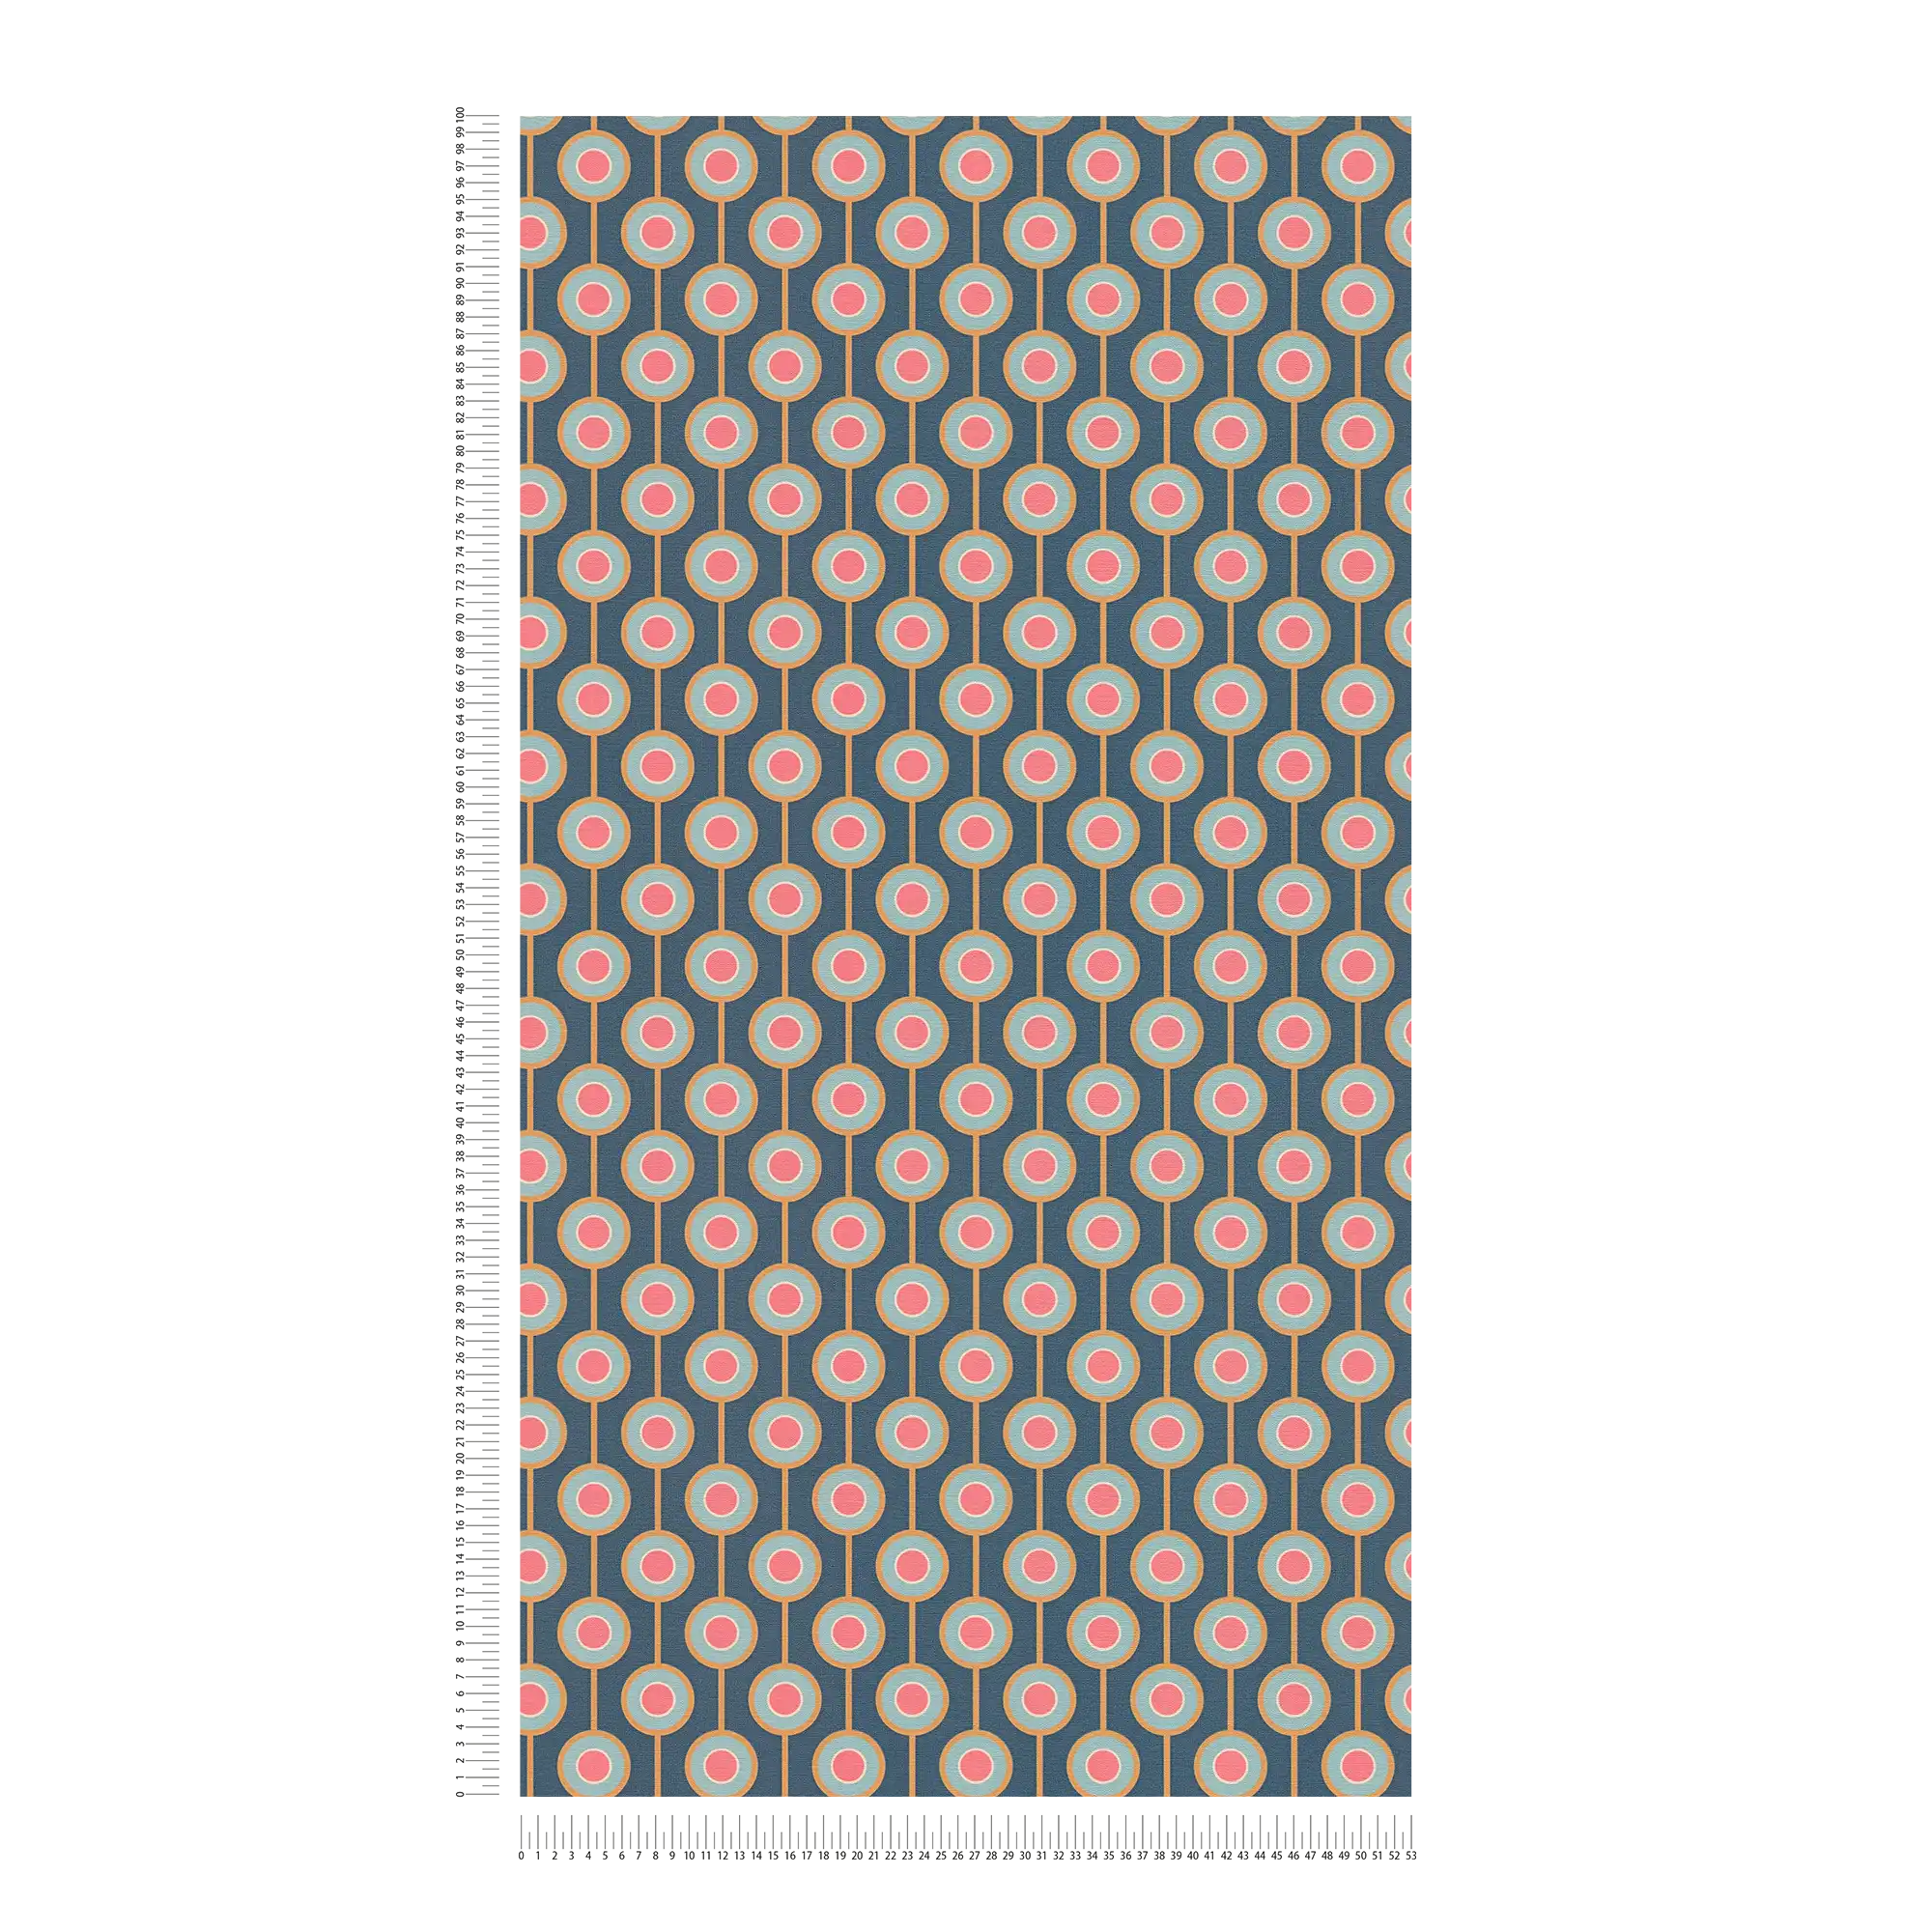             Retro wallpaper with light structure and circle pattern - blue, yellow, pink
        